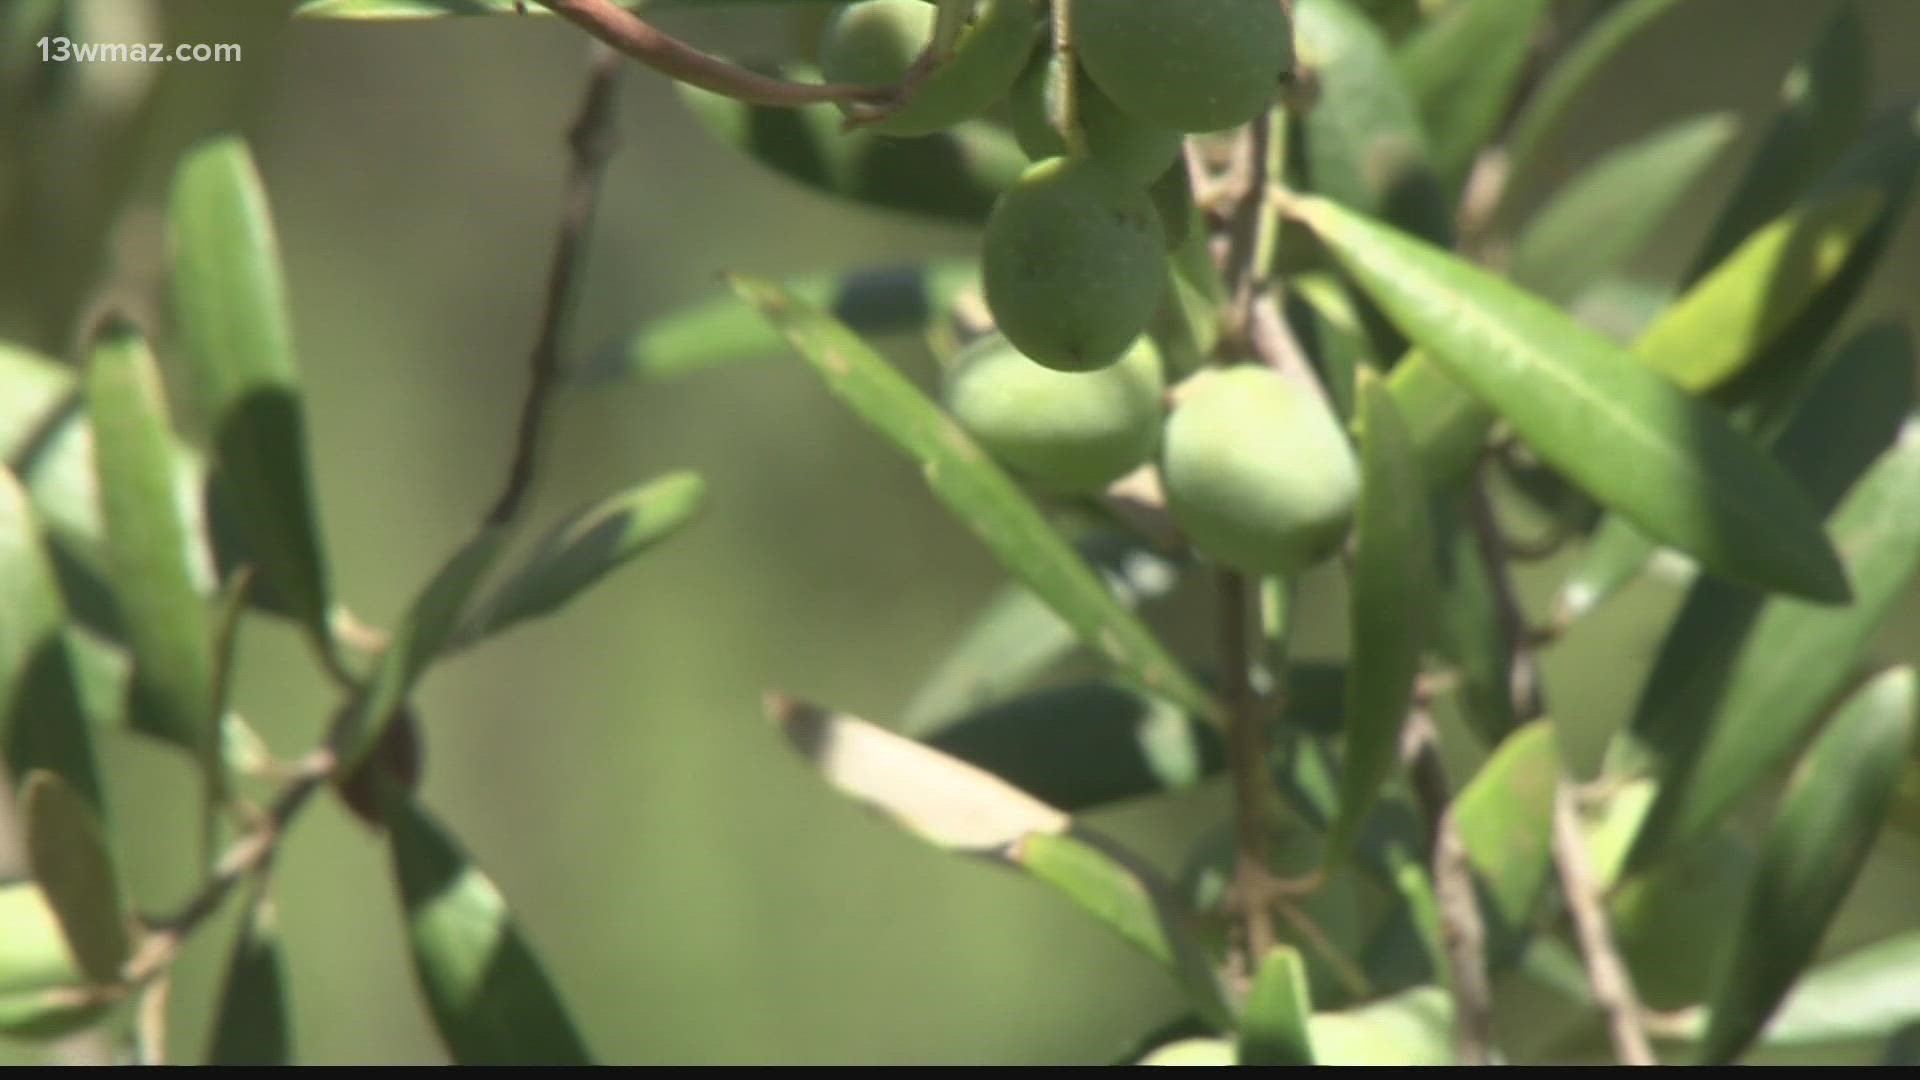 In 2014, Sharon Flanagan planted thousands of olive trees. Today, she's got 18 acres.